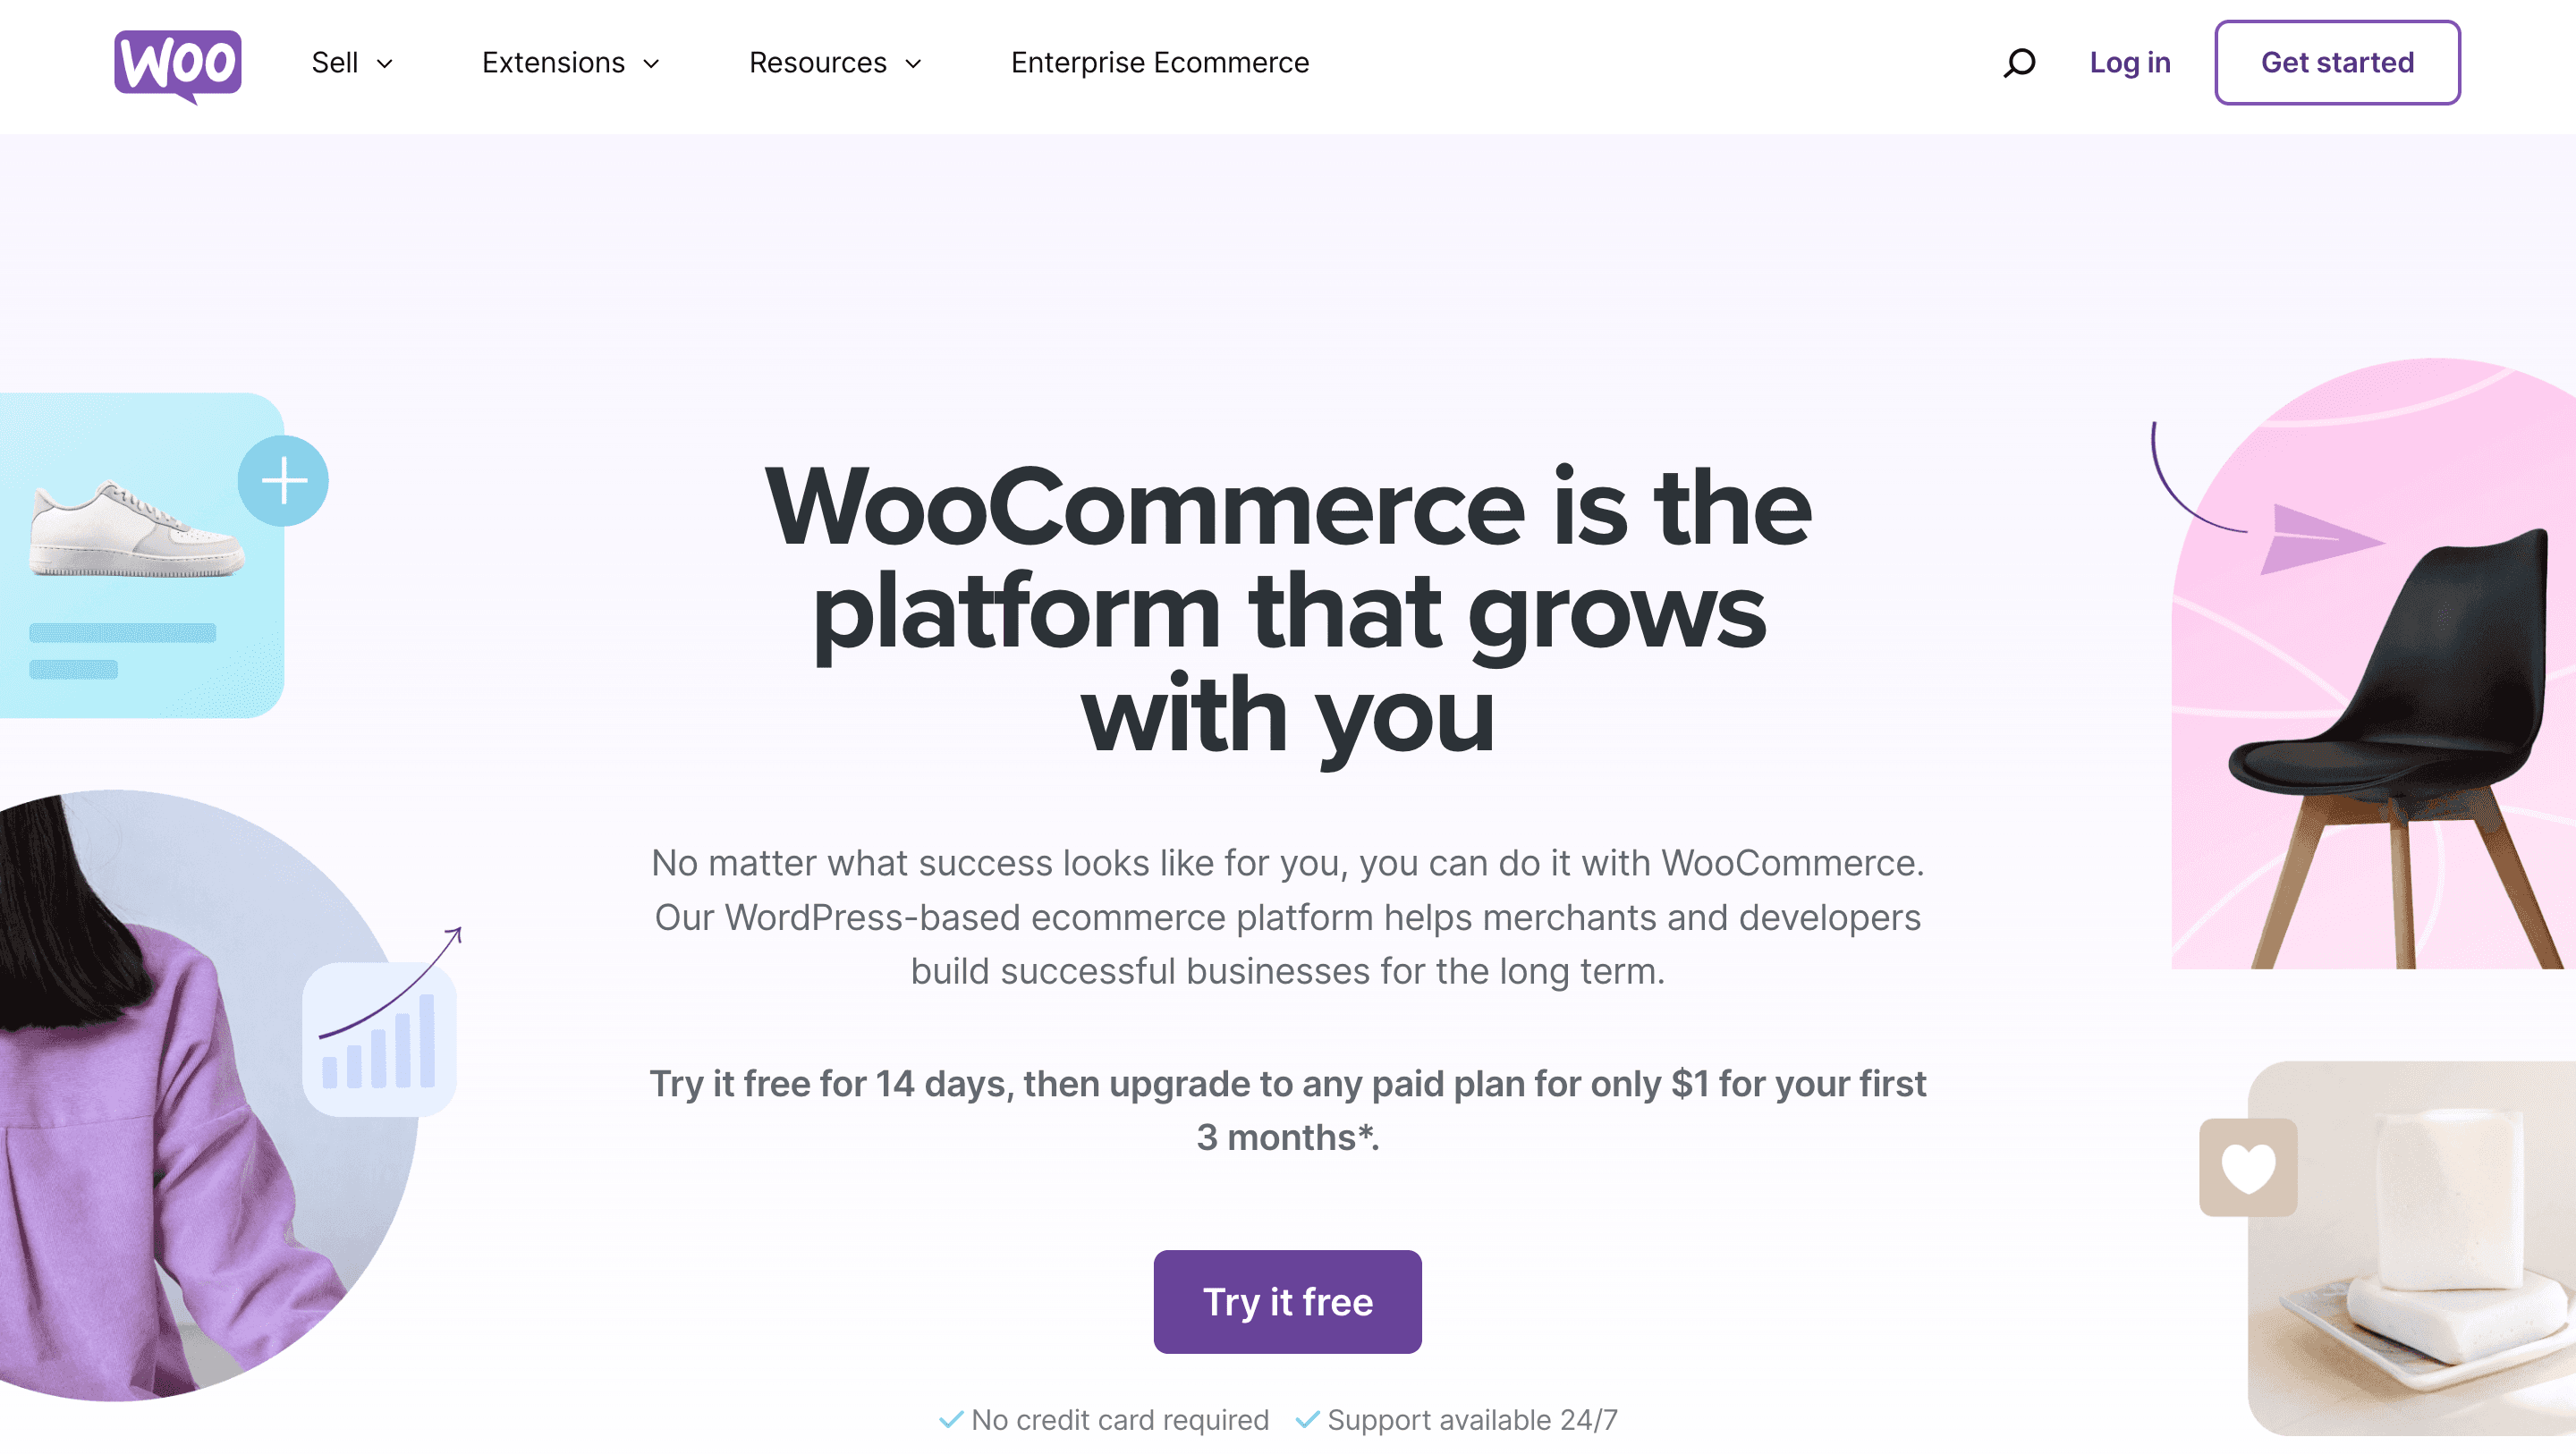 Image of Woocommerce website home page